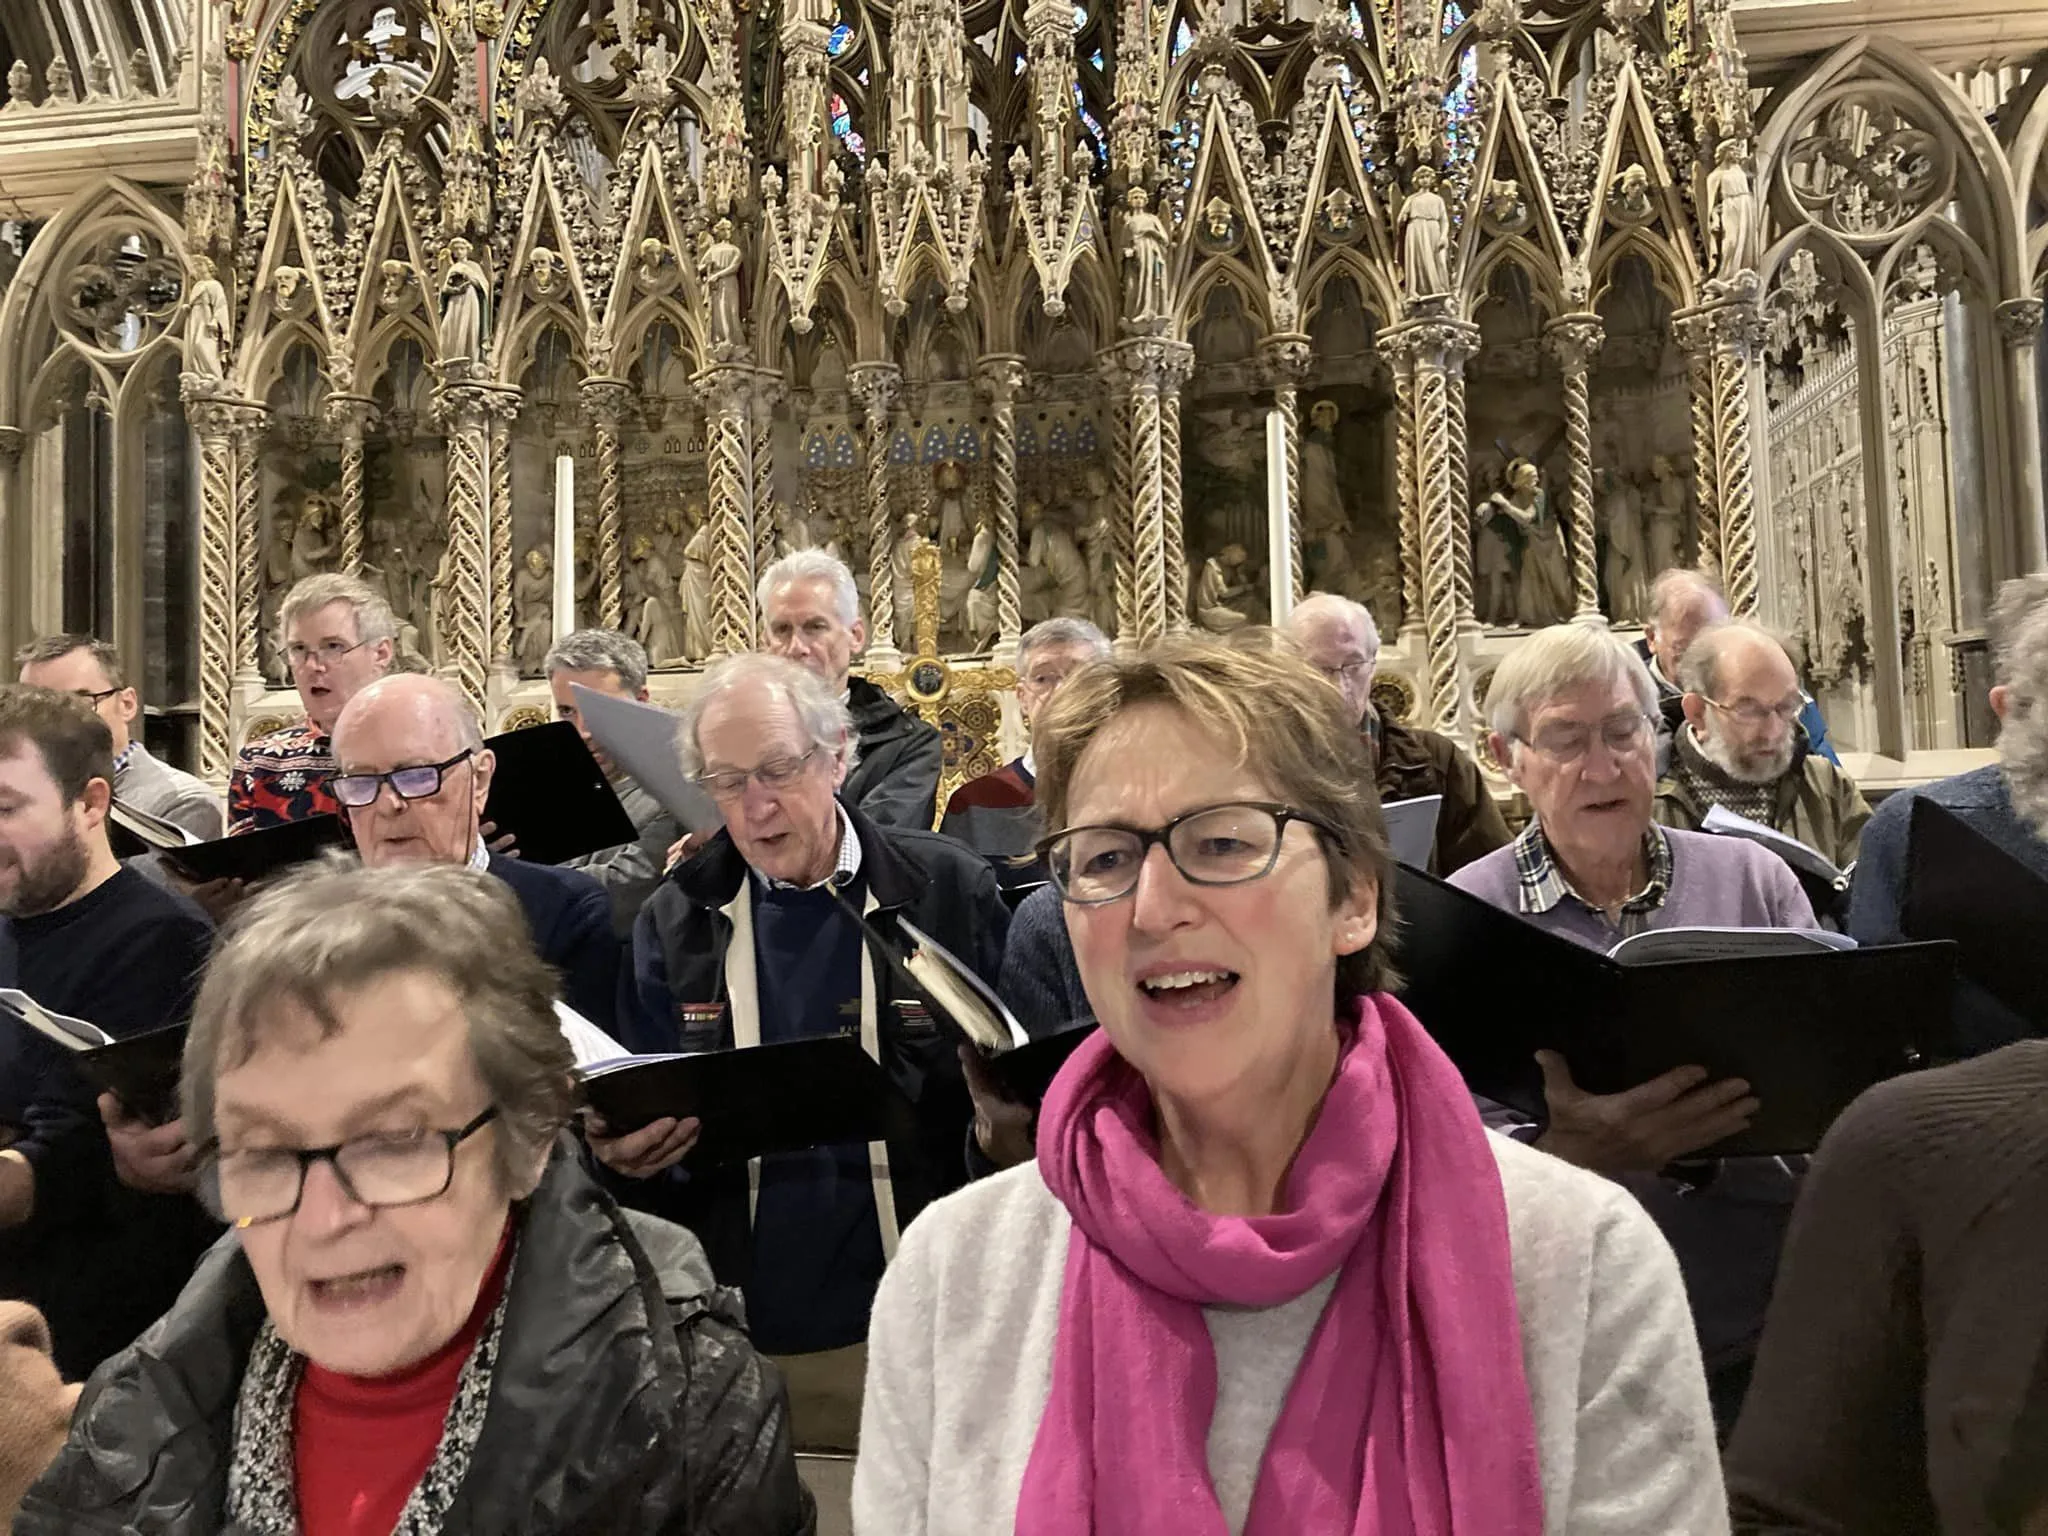 The Choral Society’s Christmas Concert is usually held in St Mary’s Church, but this year the venue was changed to the presbytery of Ely Cathedral